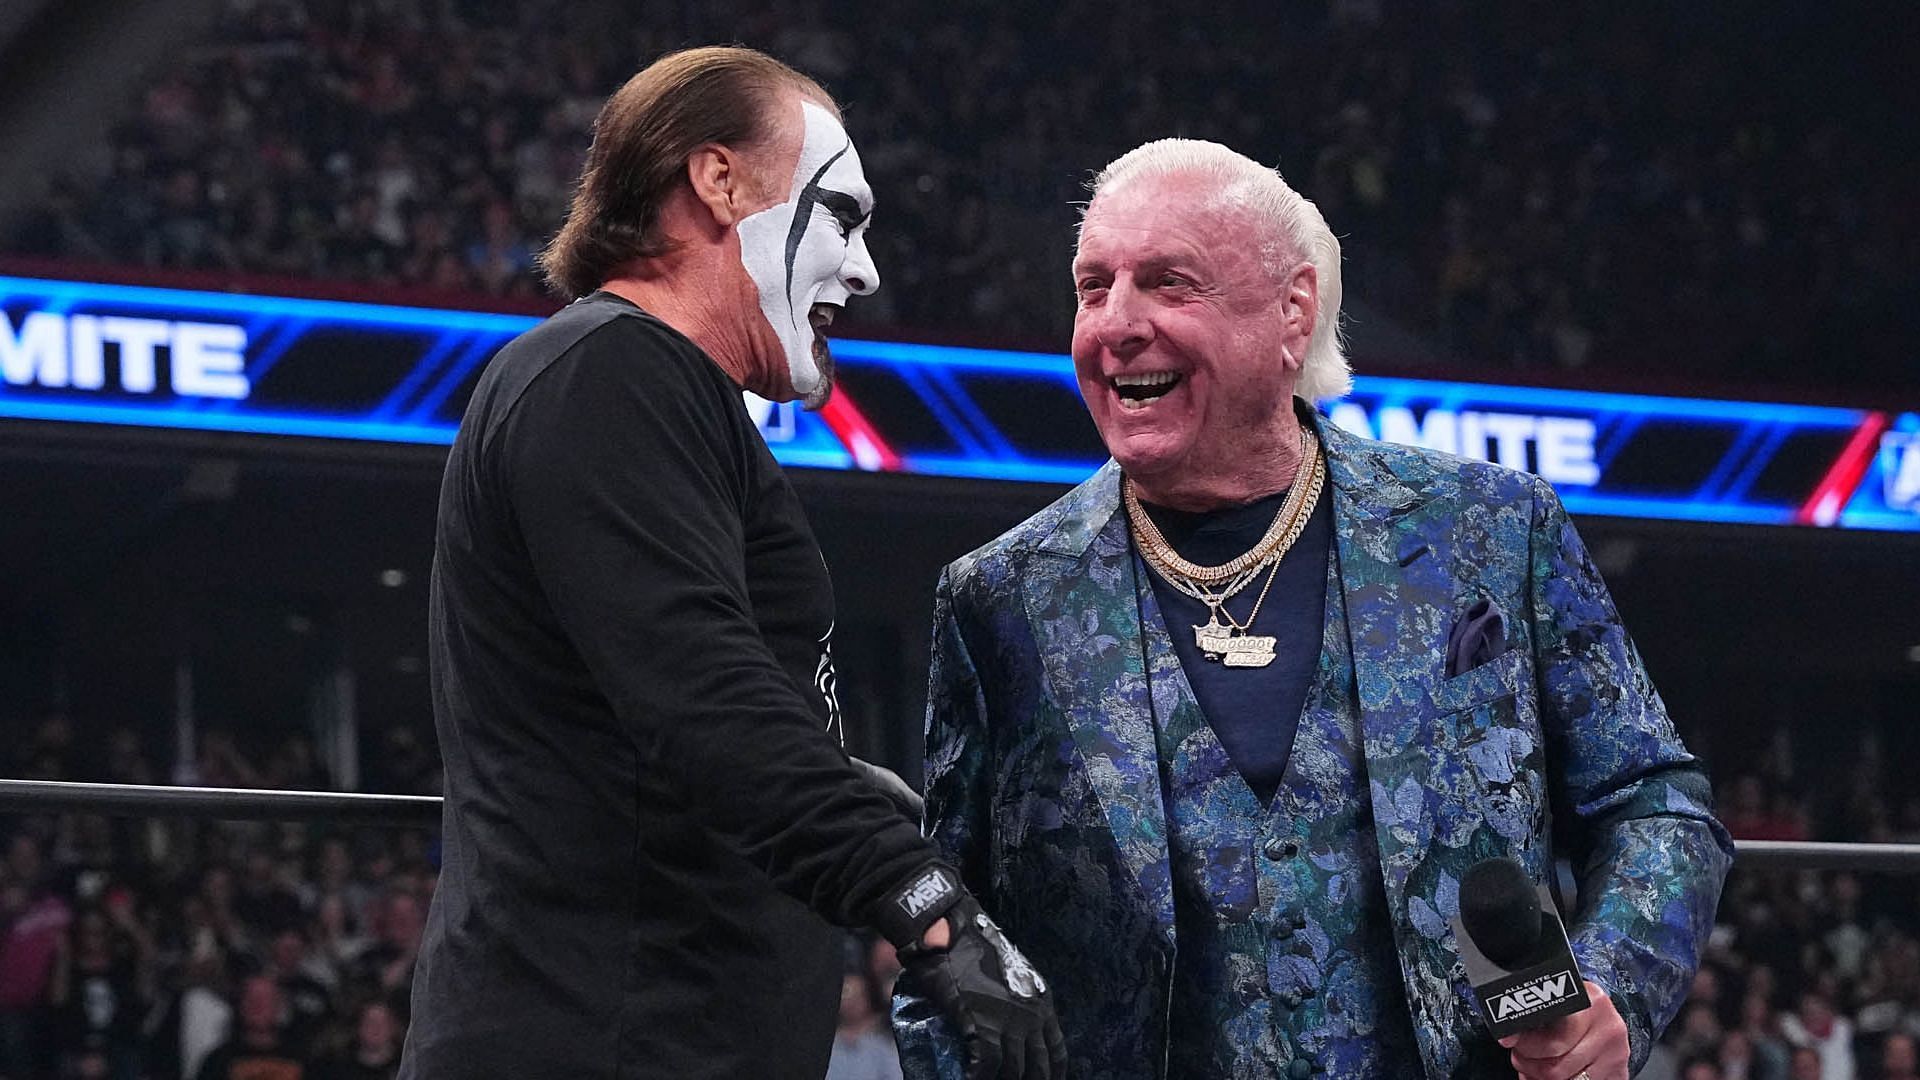 The Icon and The Nature Boy share the ring (image credit: All Elite Wrestling)